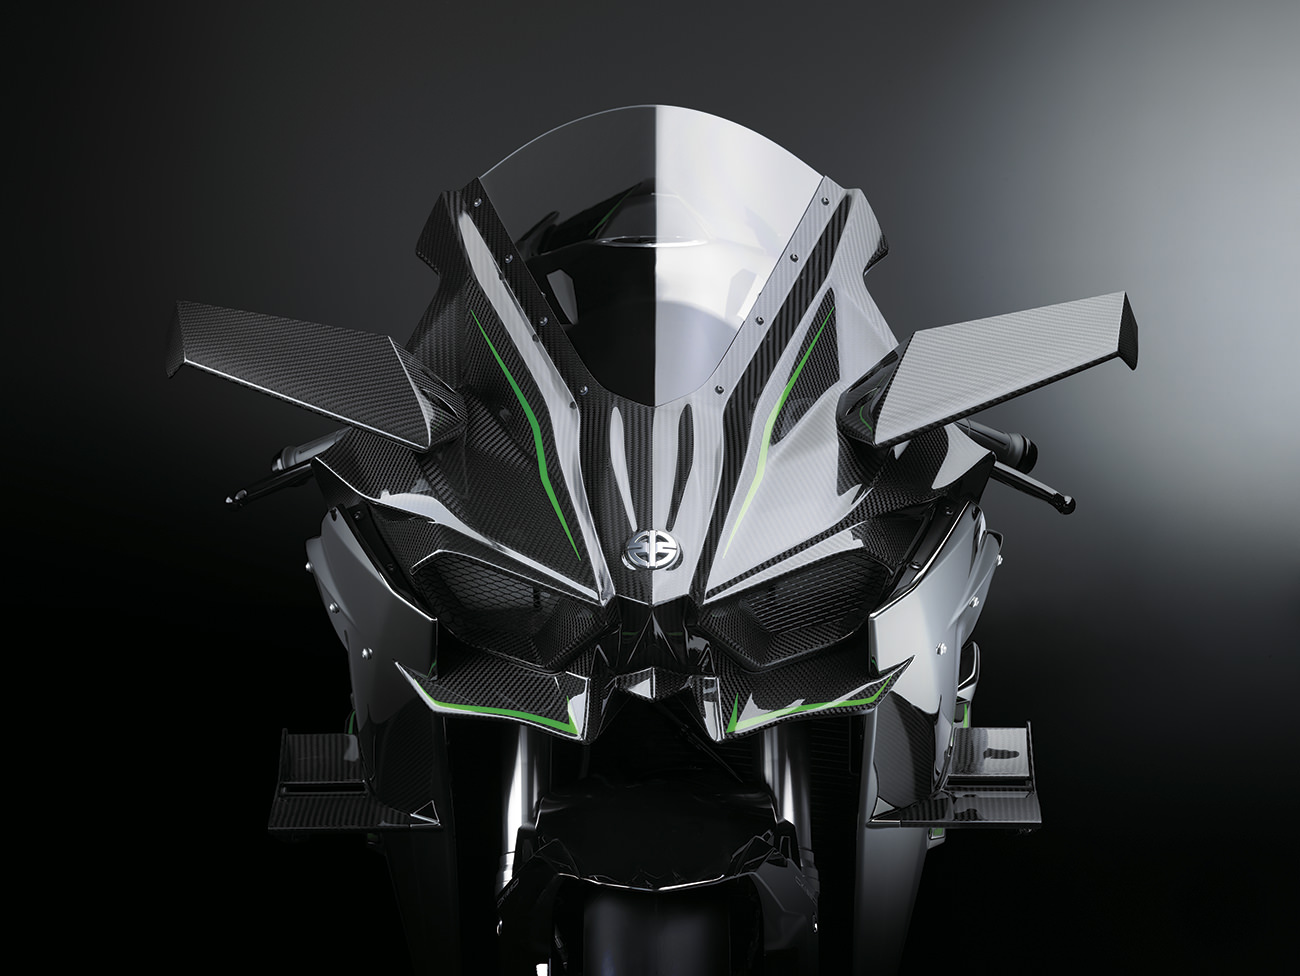 The Ninja H2R by a